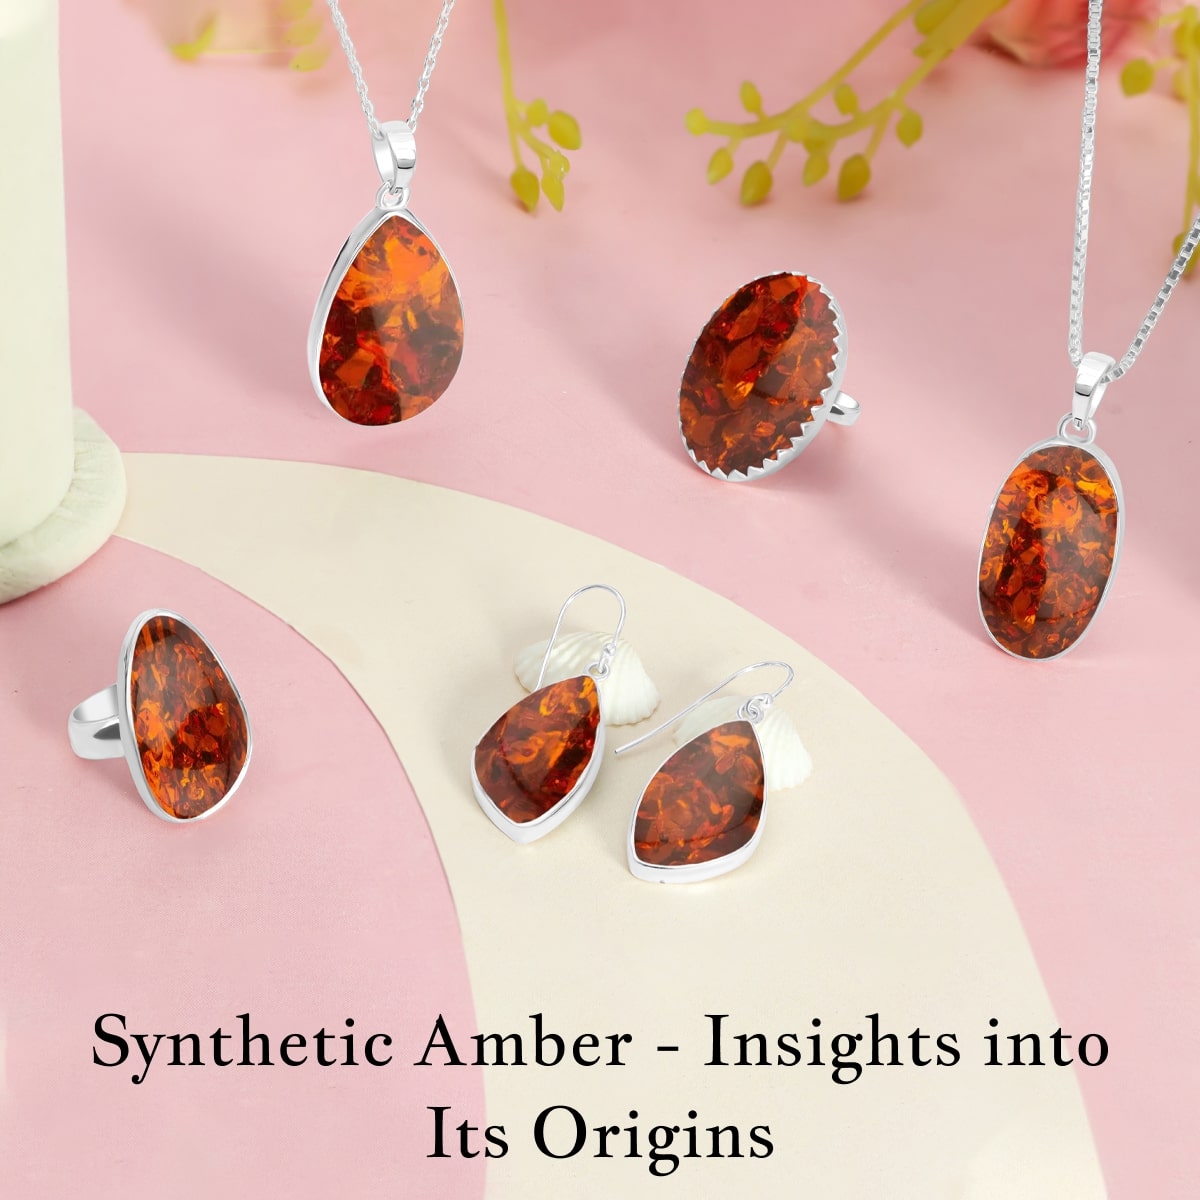 History of Synthetic Amber Stone